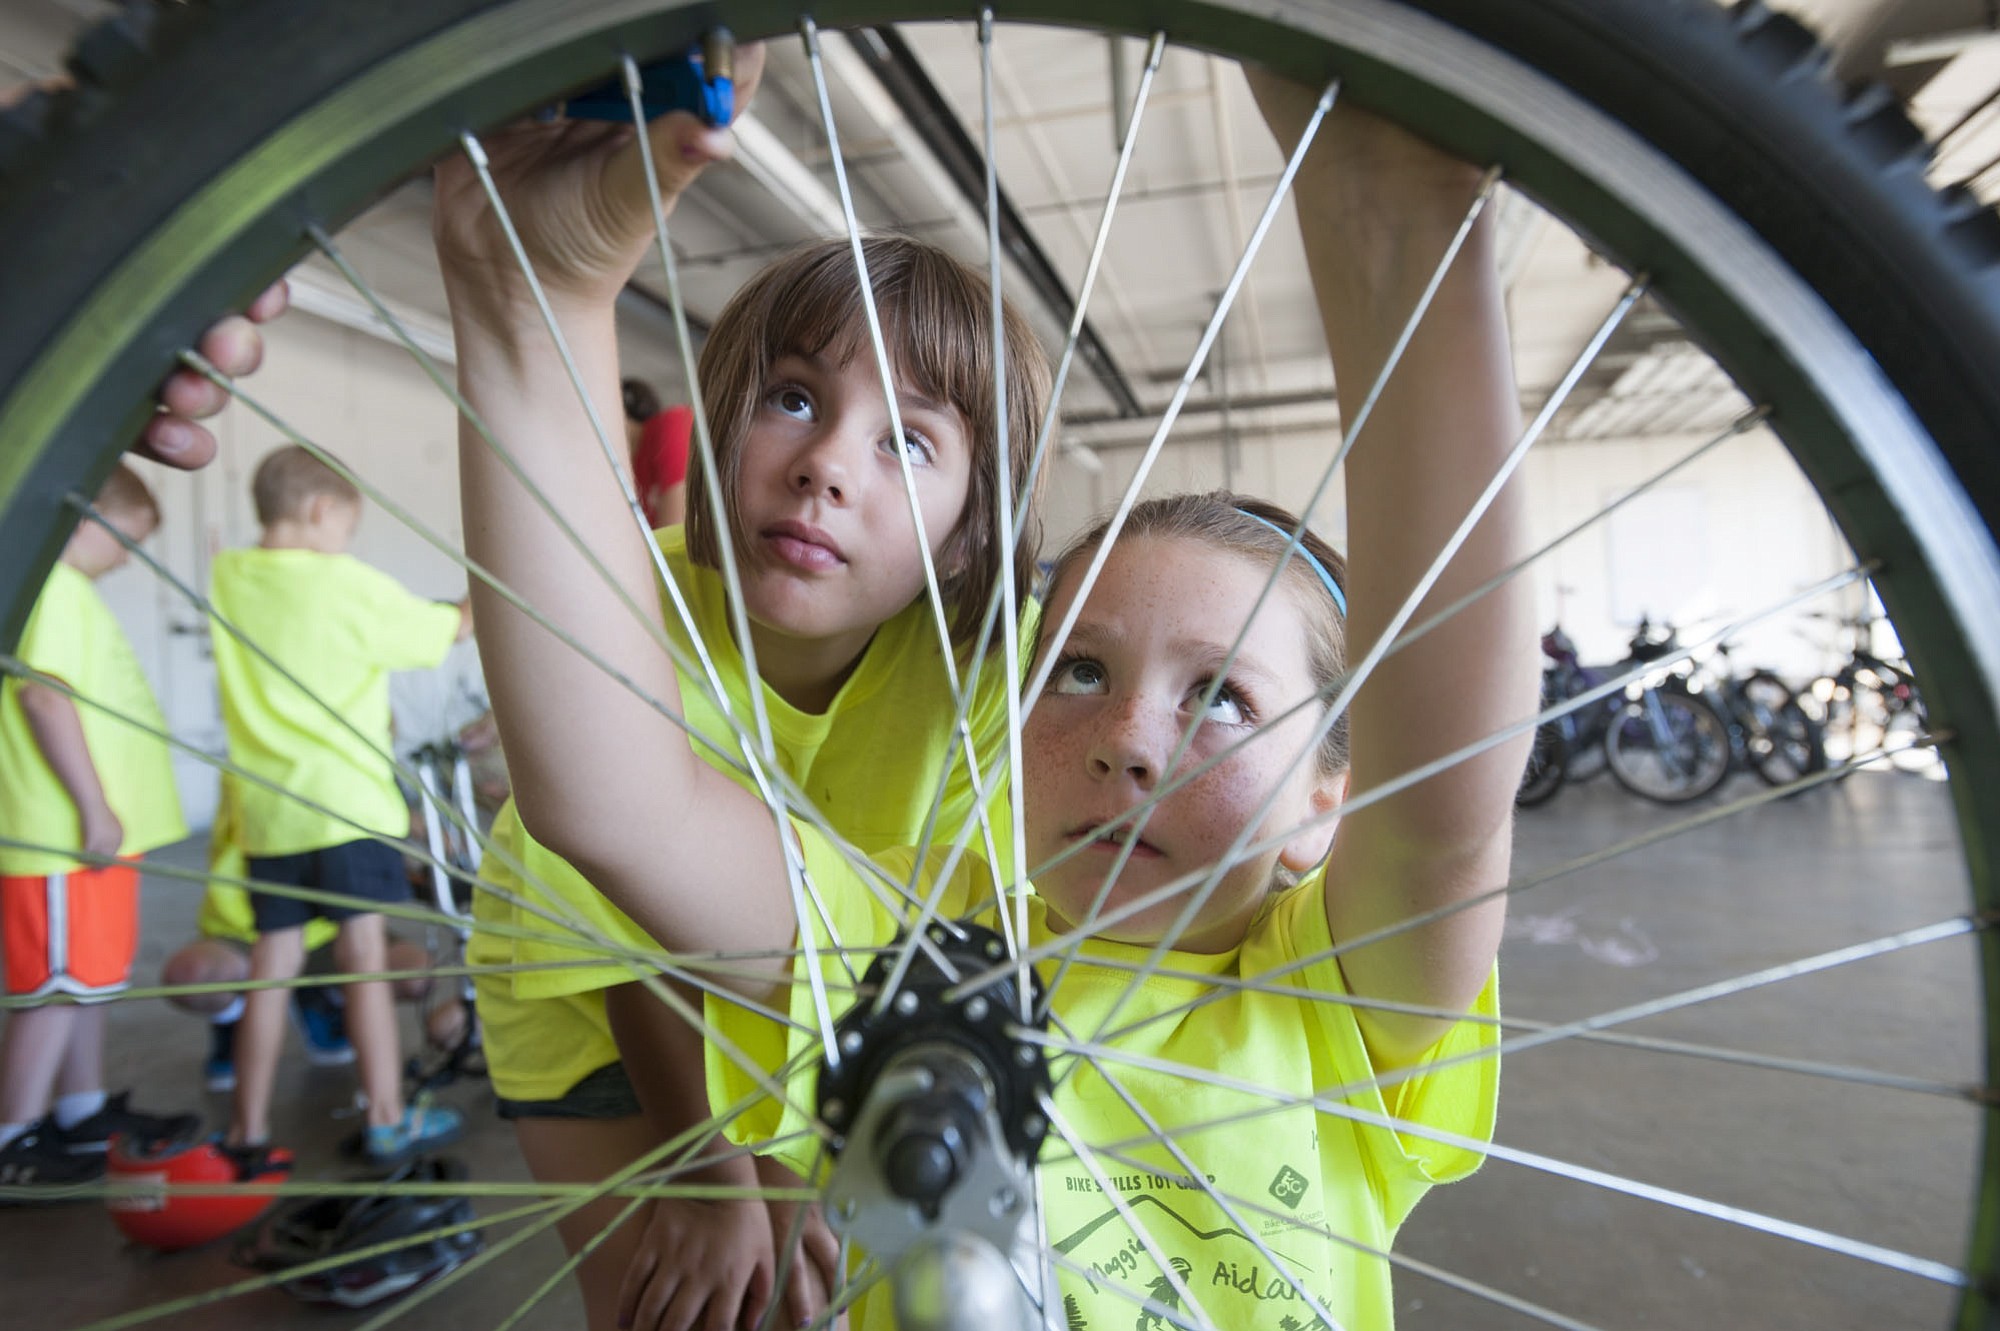 Adrianna Hatfield, right, works to separate a tire from a rim while Joycelyn Babcock watches during Bike 101, a weeklong day camp offered by the city of Vancouver.